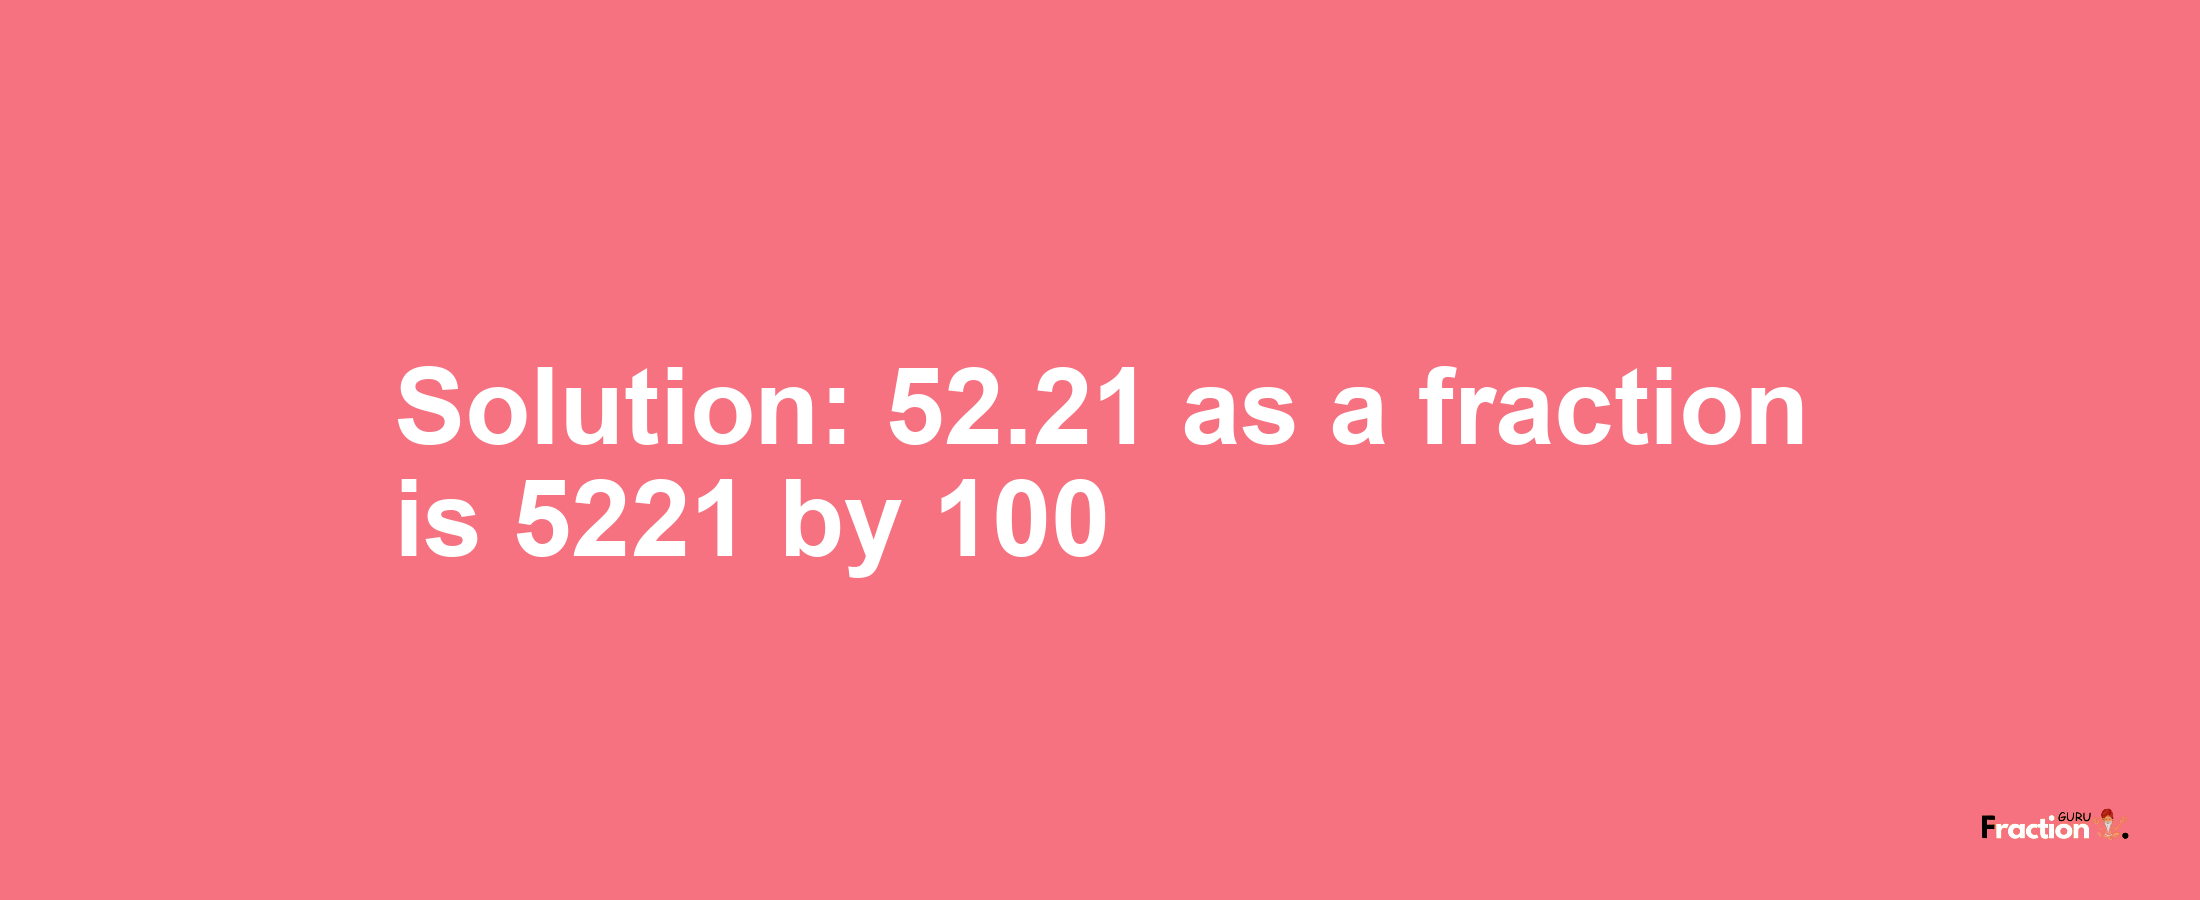 Solution:52.21 as a fraction is 5221/100